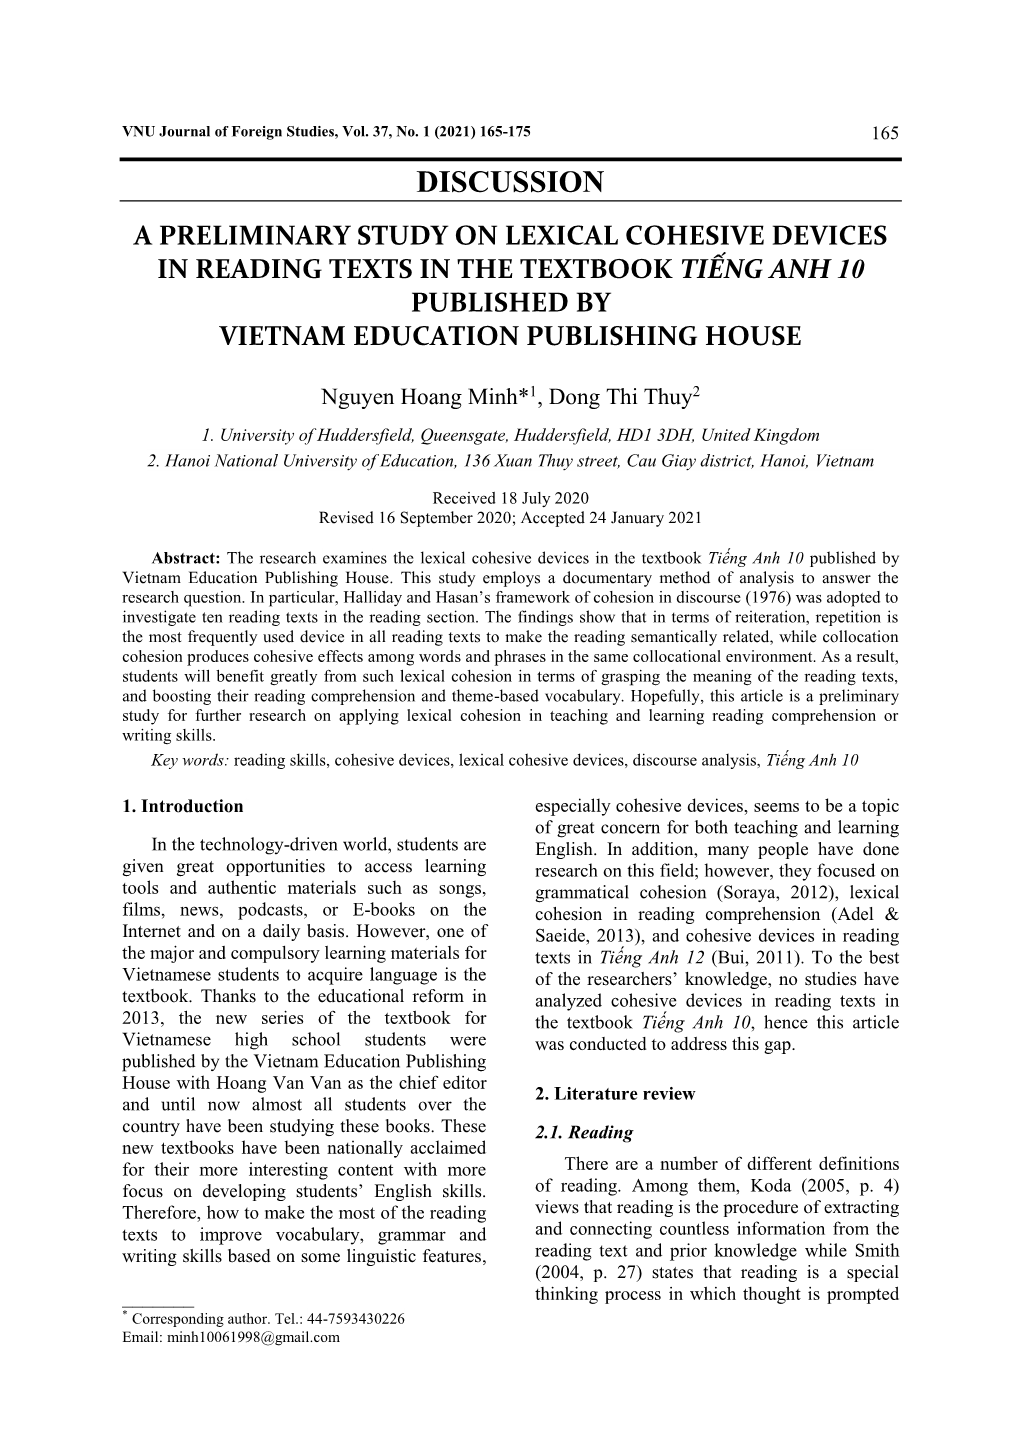 Discussion a Preliminary Study on Lexical Cohesive Devices in Reading Texts in the Textbook Tiếng Anh 10 Published by Vietnam Education Publishing House